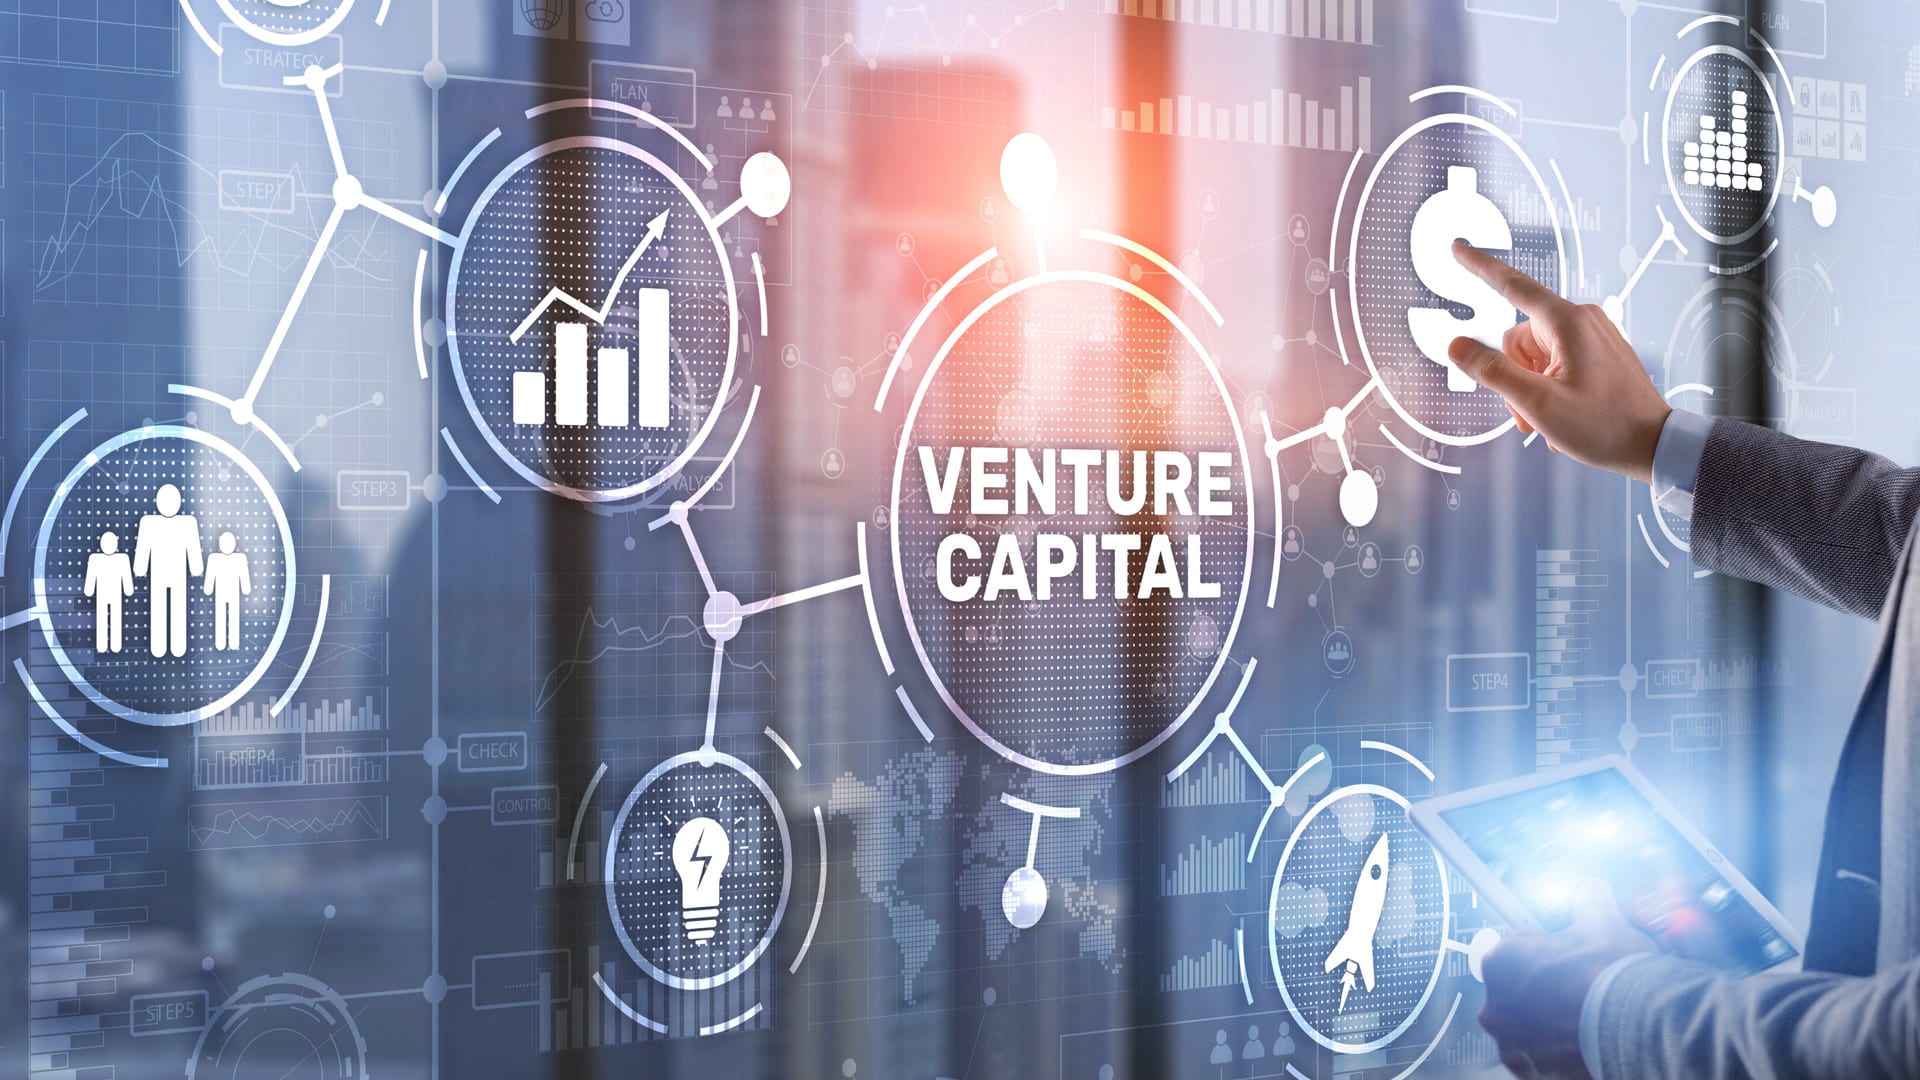 Physis Capital hopes to start investing in promising startups by Oct